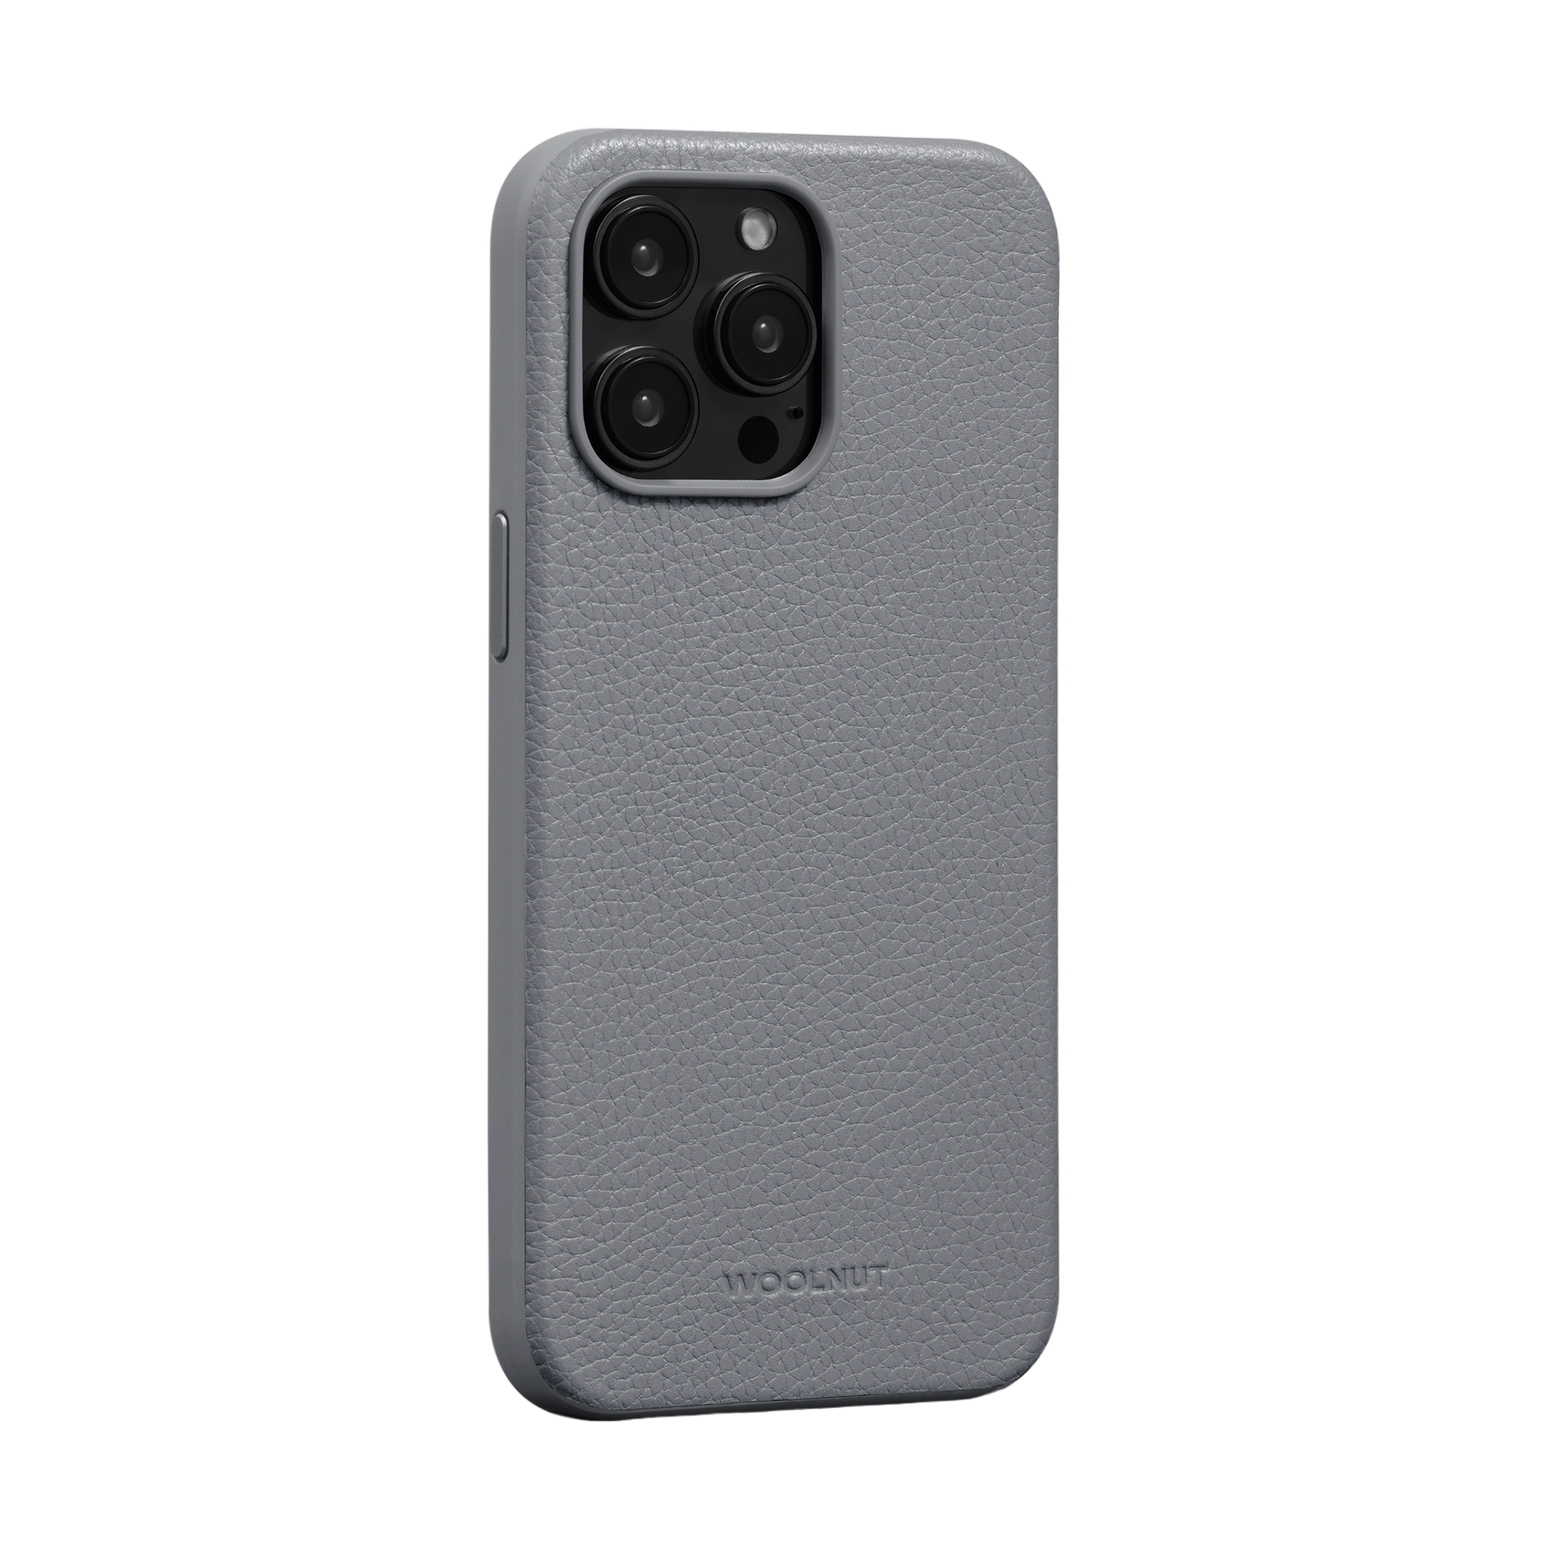 WOOLNUT Leather Case for iPhone 15 Pro Max - Grey